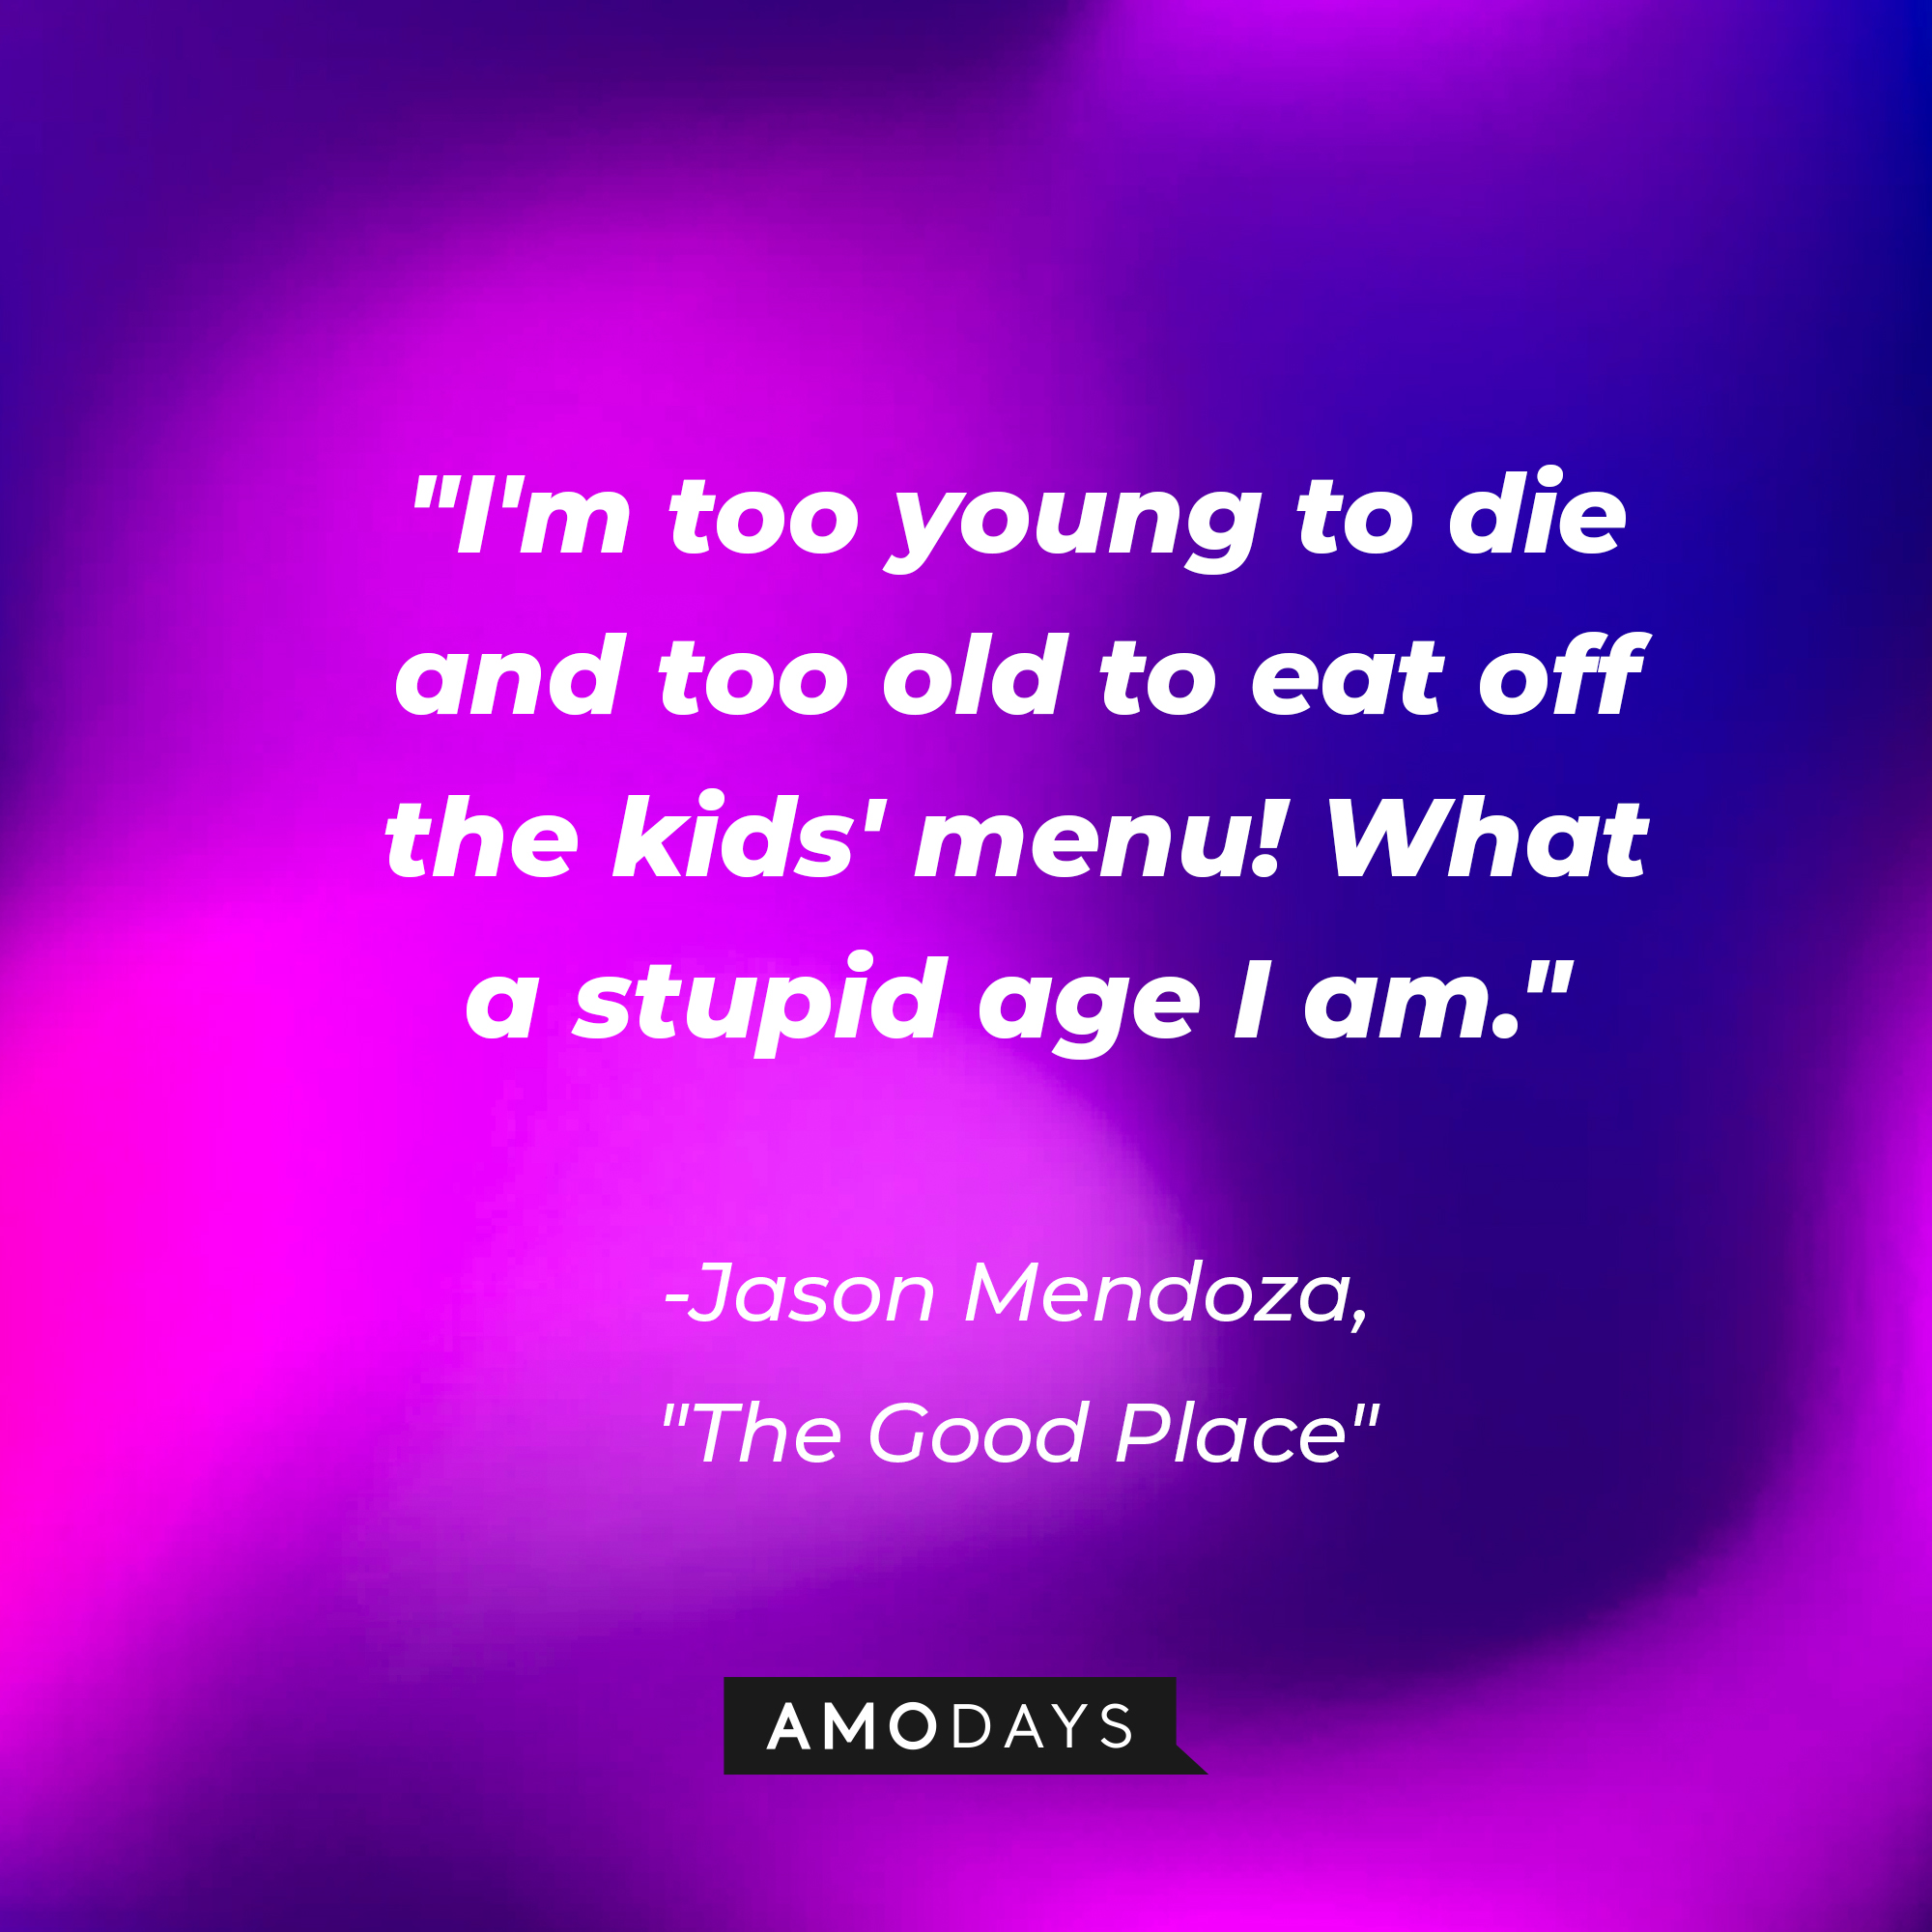 Jason Mendoza's quote in "The Good Place:" “I'm too young to die and too old to eat off the kids' menu! What a stupid age I am.” | Source: Amodays